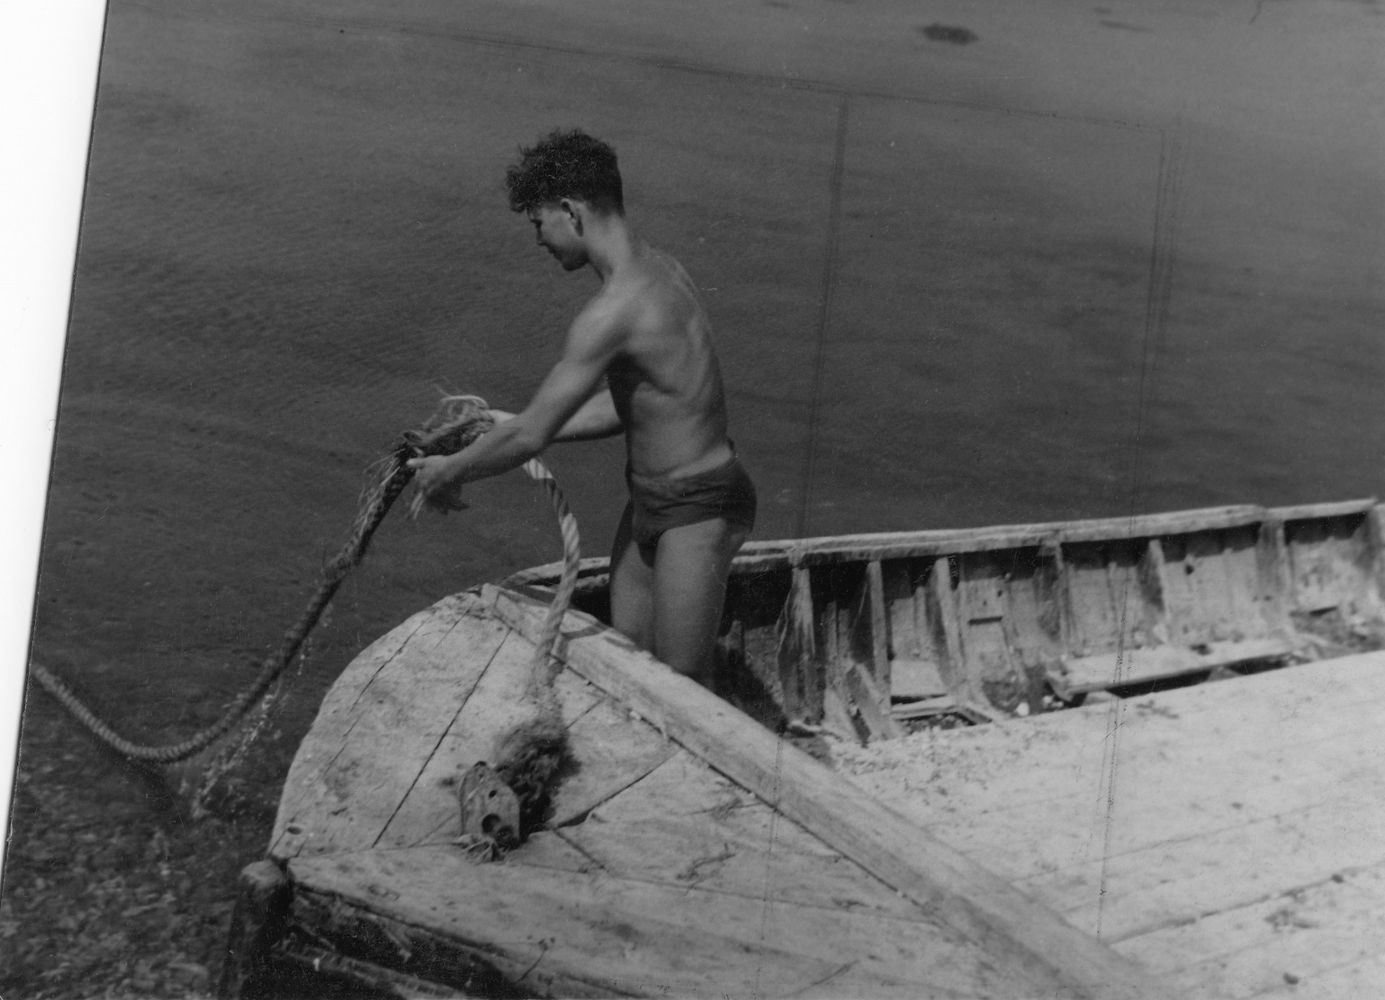 Male figure in boat pulling on rope [P25]